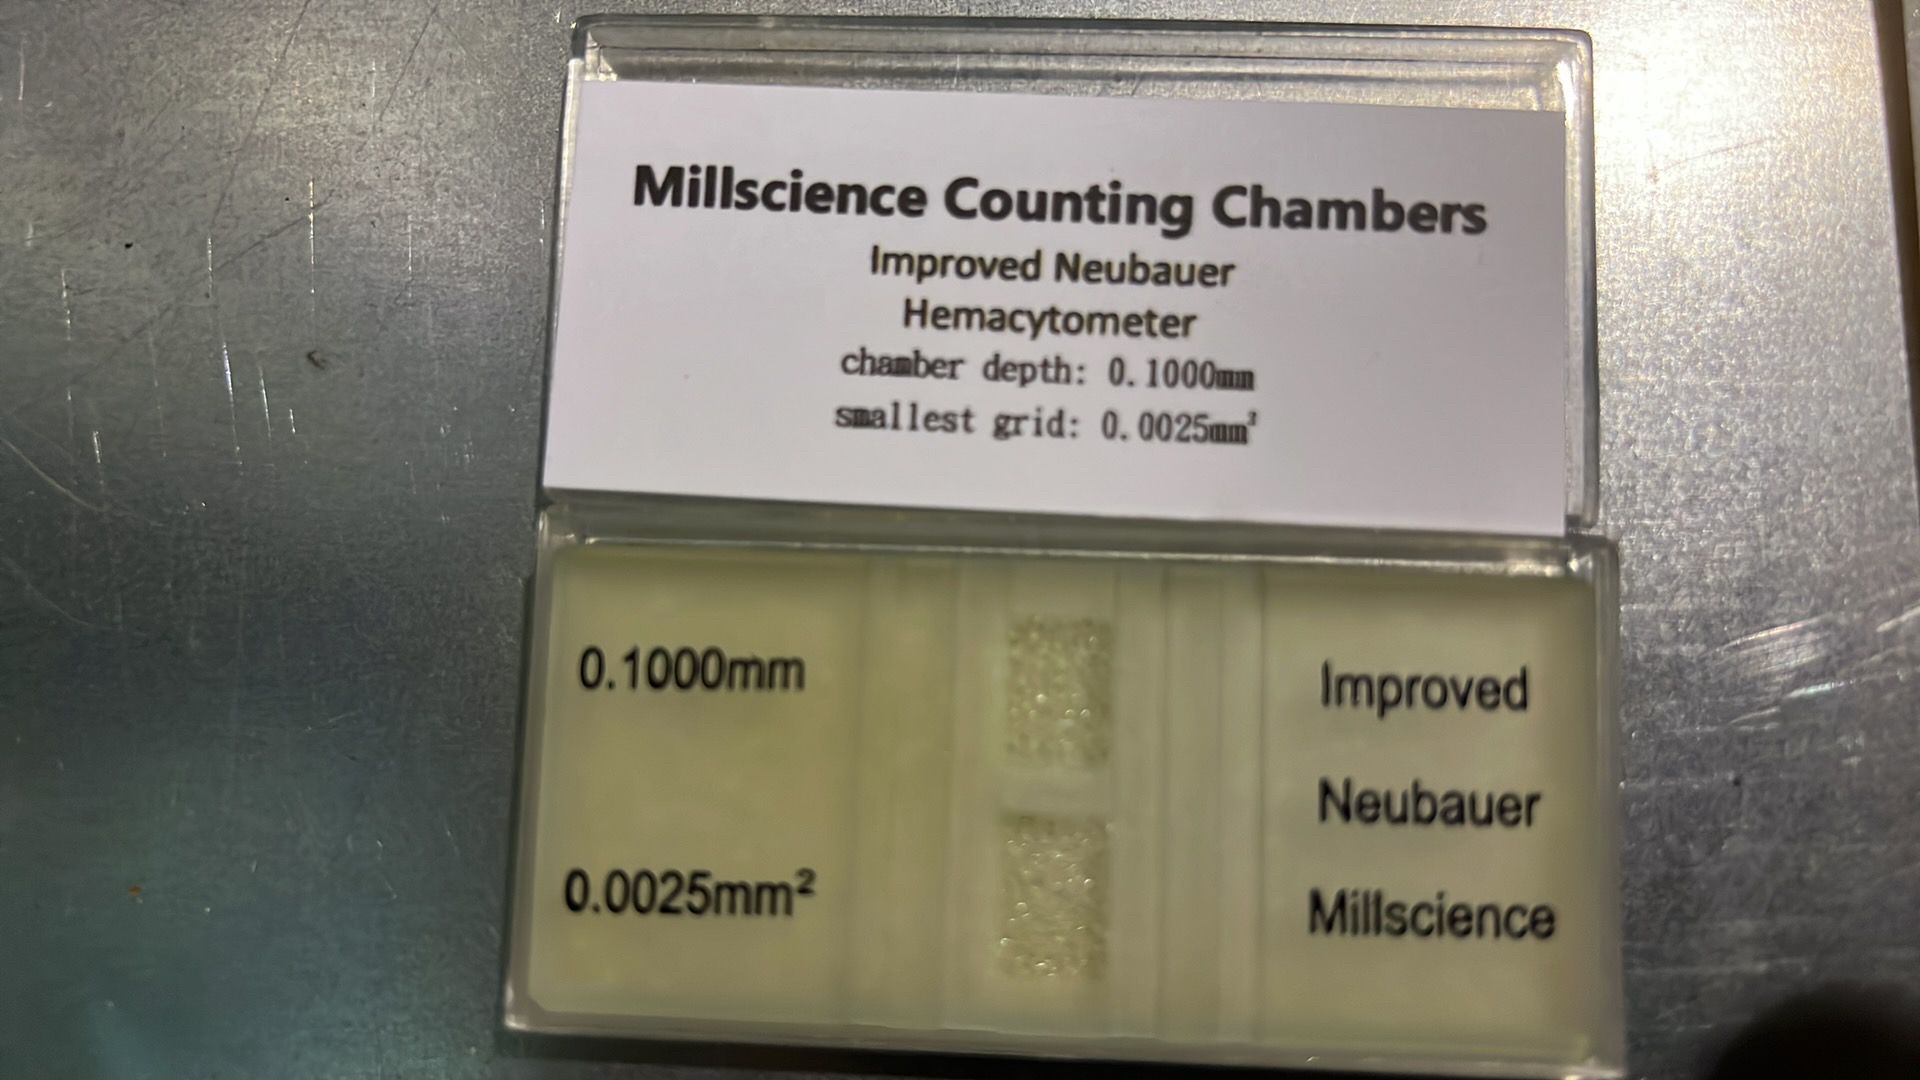 MILLSCIENCE Counting Chambers, Improved Neubauer Hemacytometer, ch. Depth 0.1000mm, smallest grid 0.